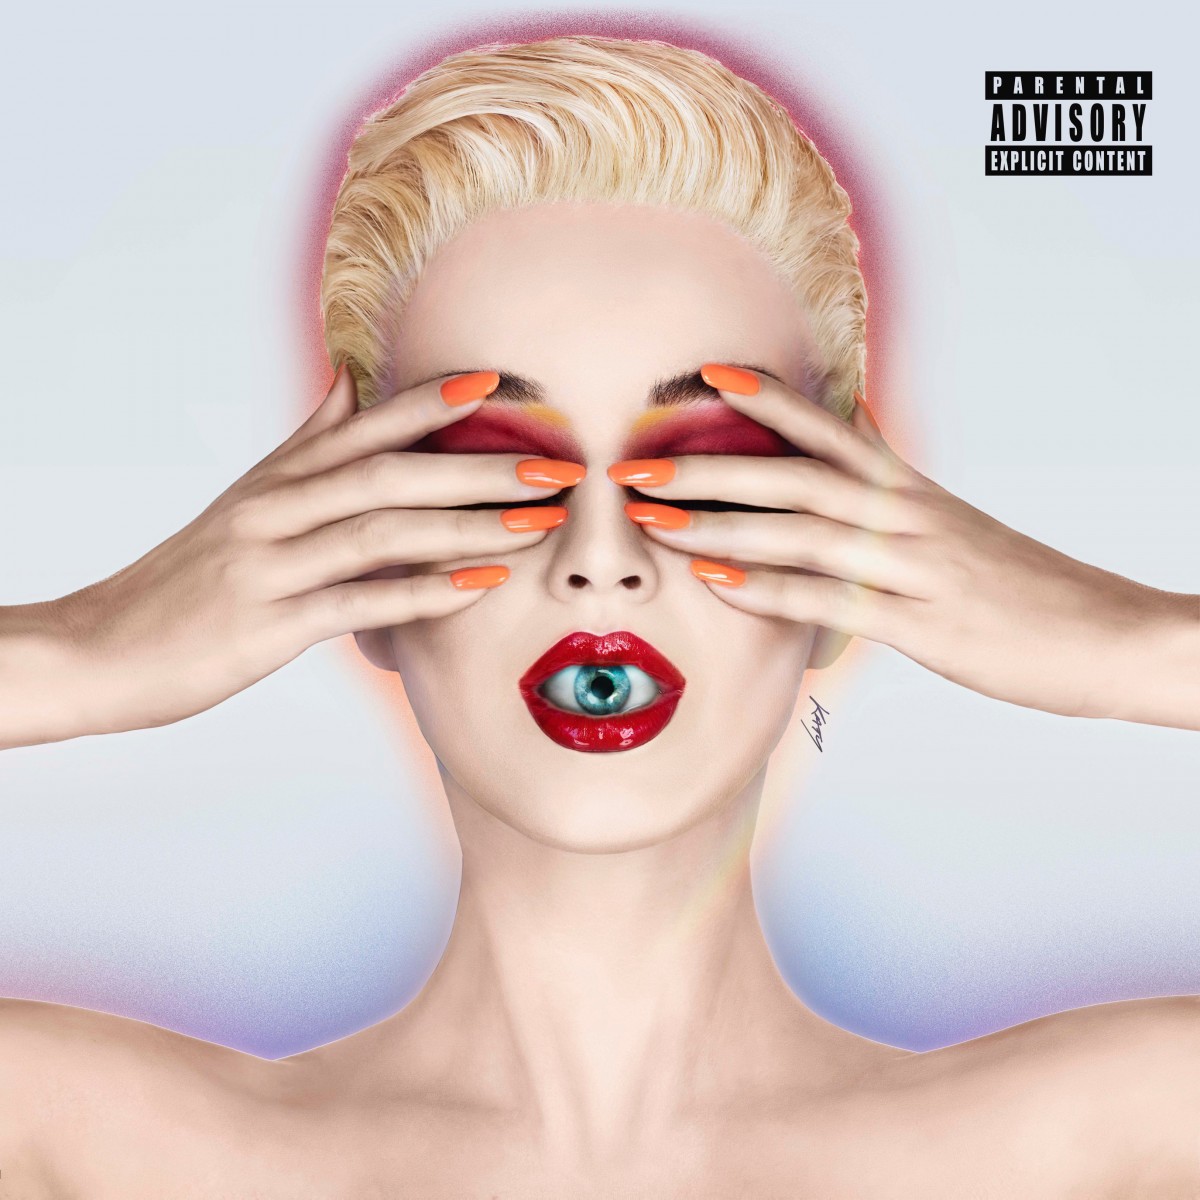 let's start with the cover bcoz it's honestly one of the most powerful covers of all time, not just because of its imagery but its message as well. it's a very simple message beautifully embedded. there is an eye in Katy's mouth which signifies she is going to speak whatever+